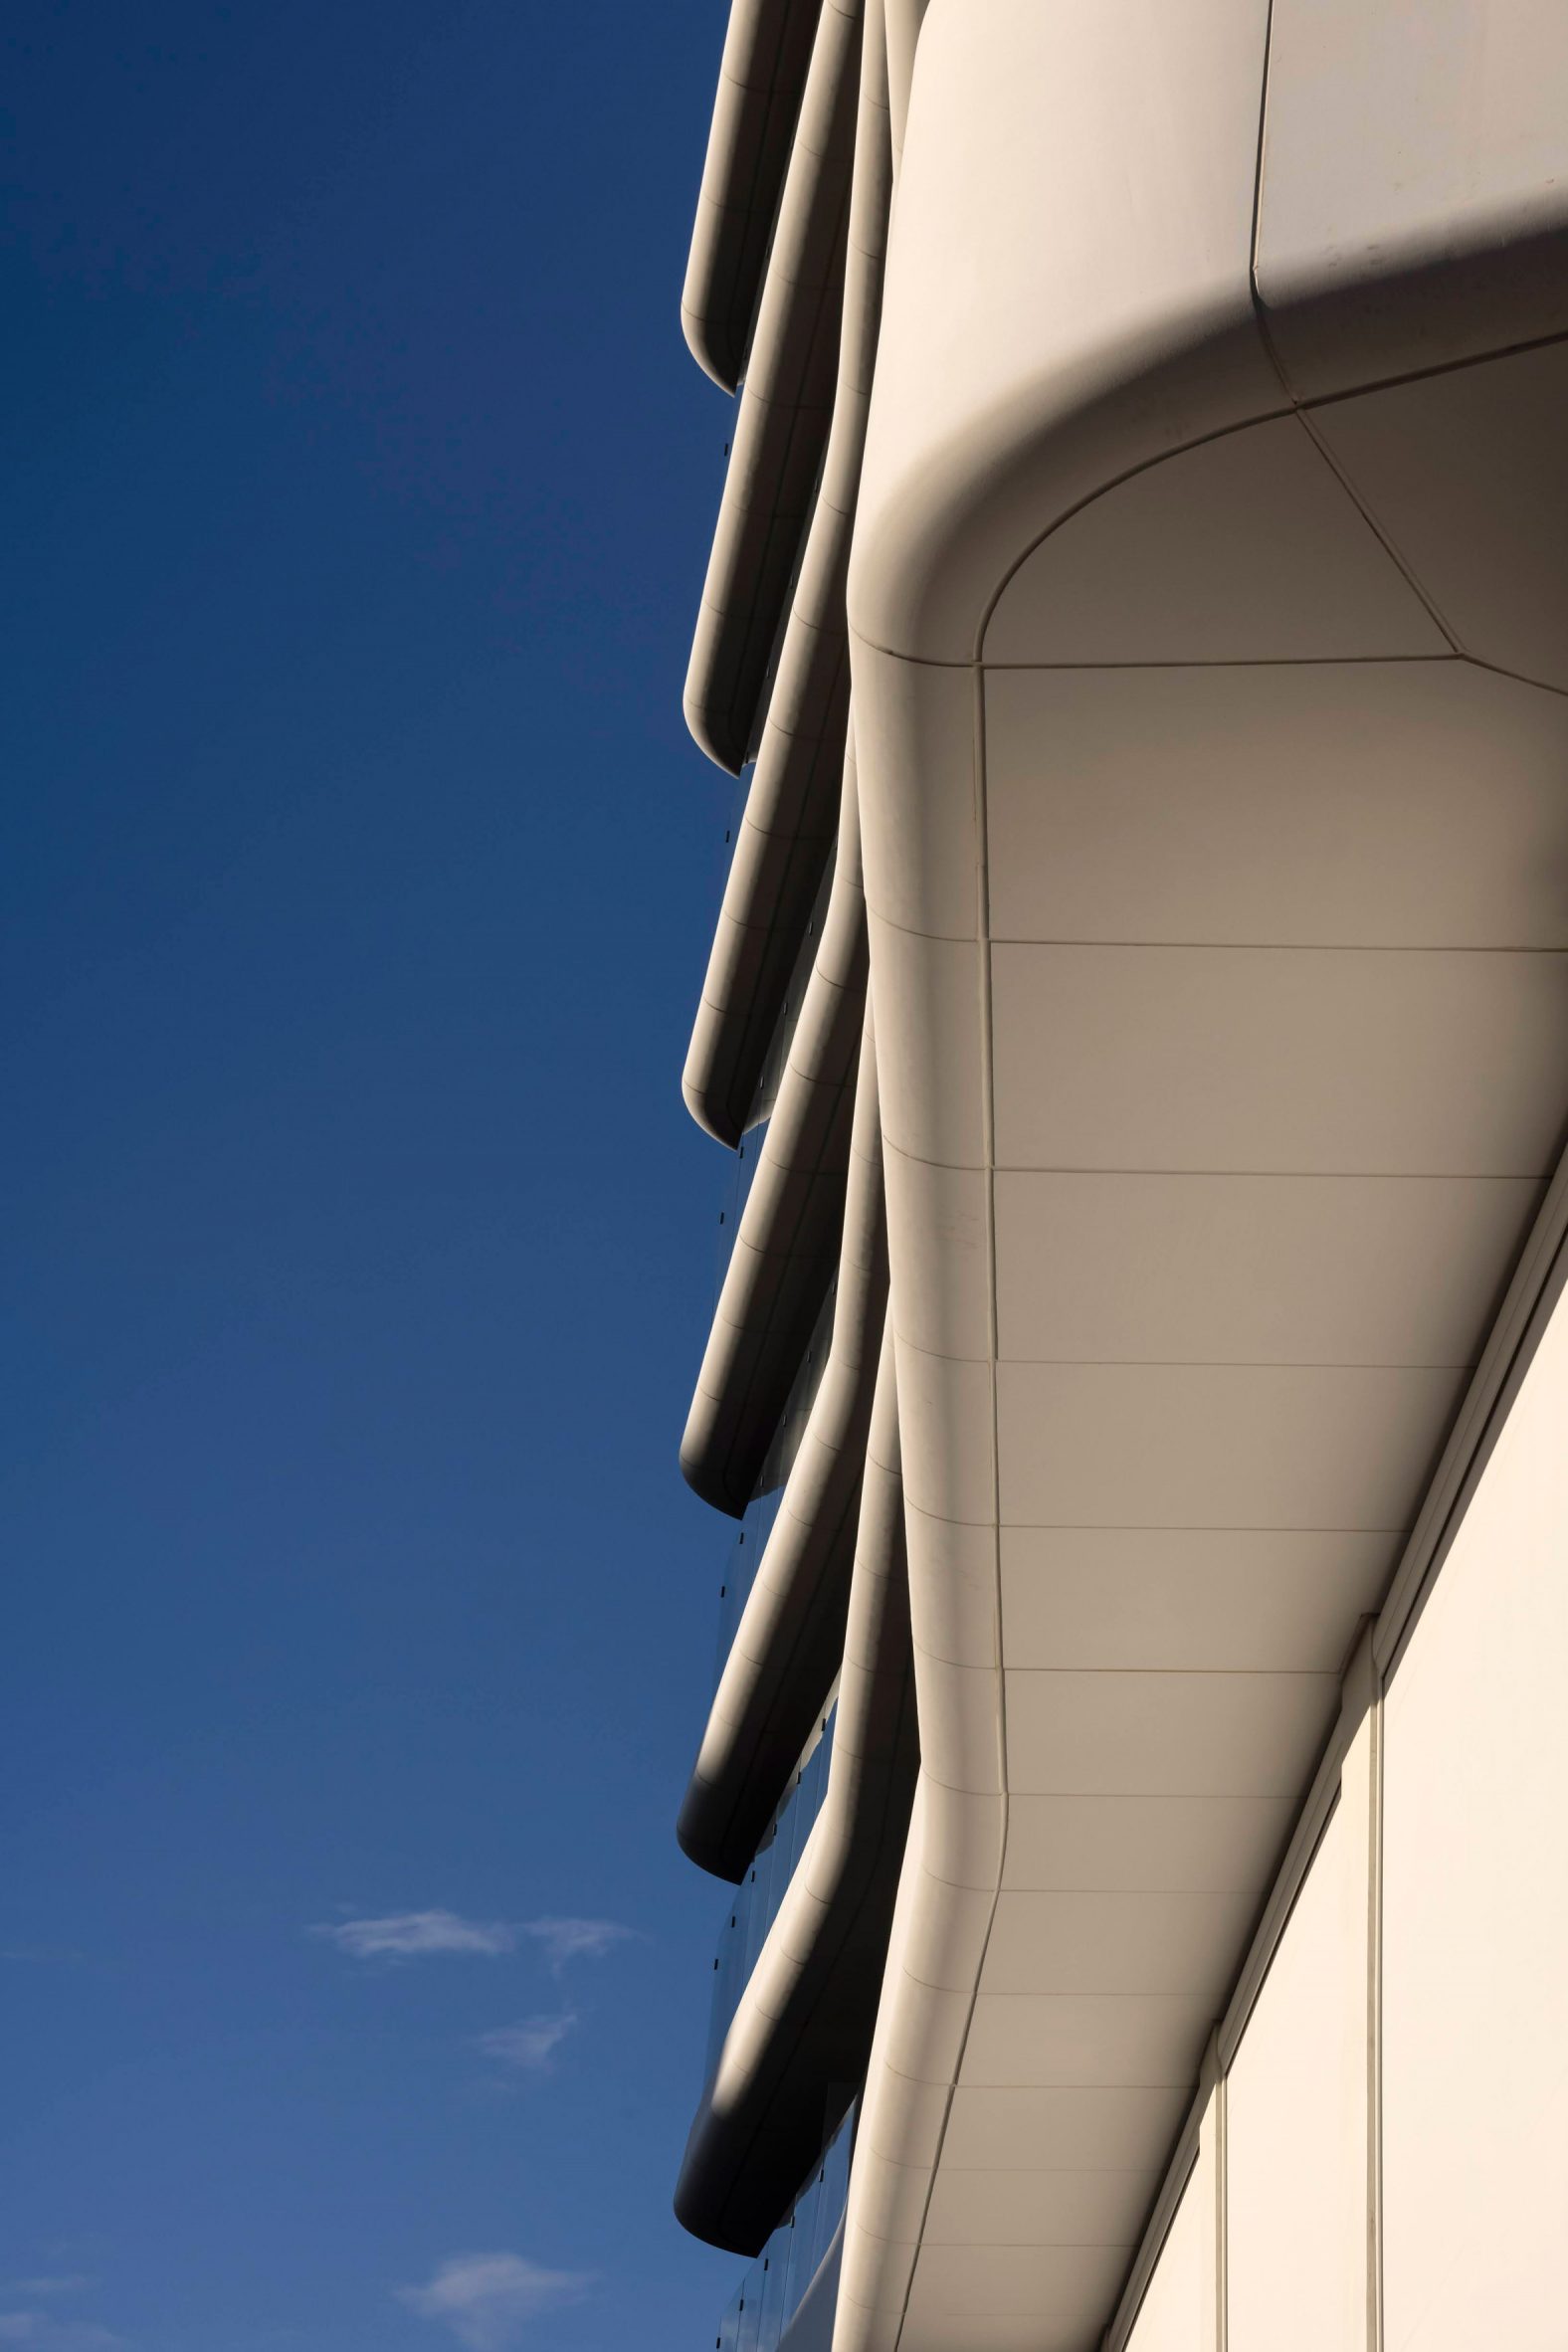 Image of the curving facade and balconies at the Antares Tower 